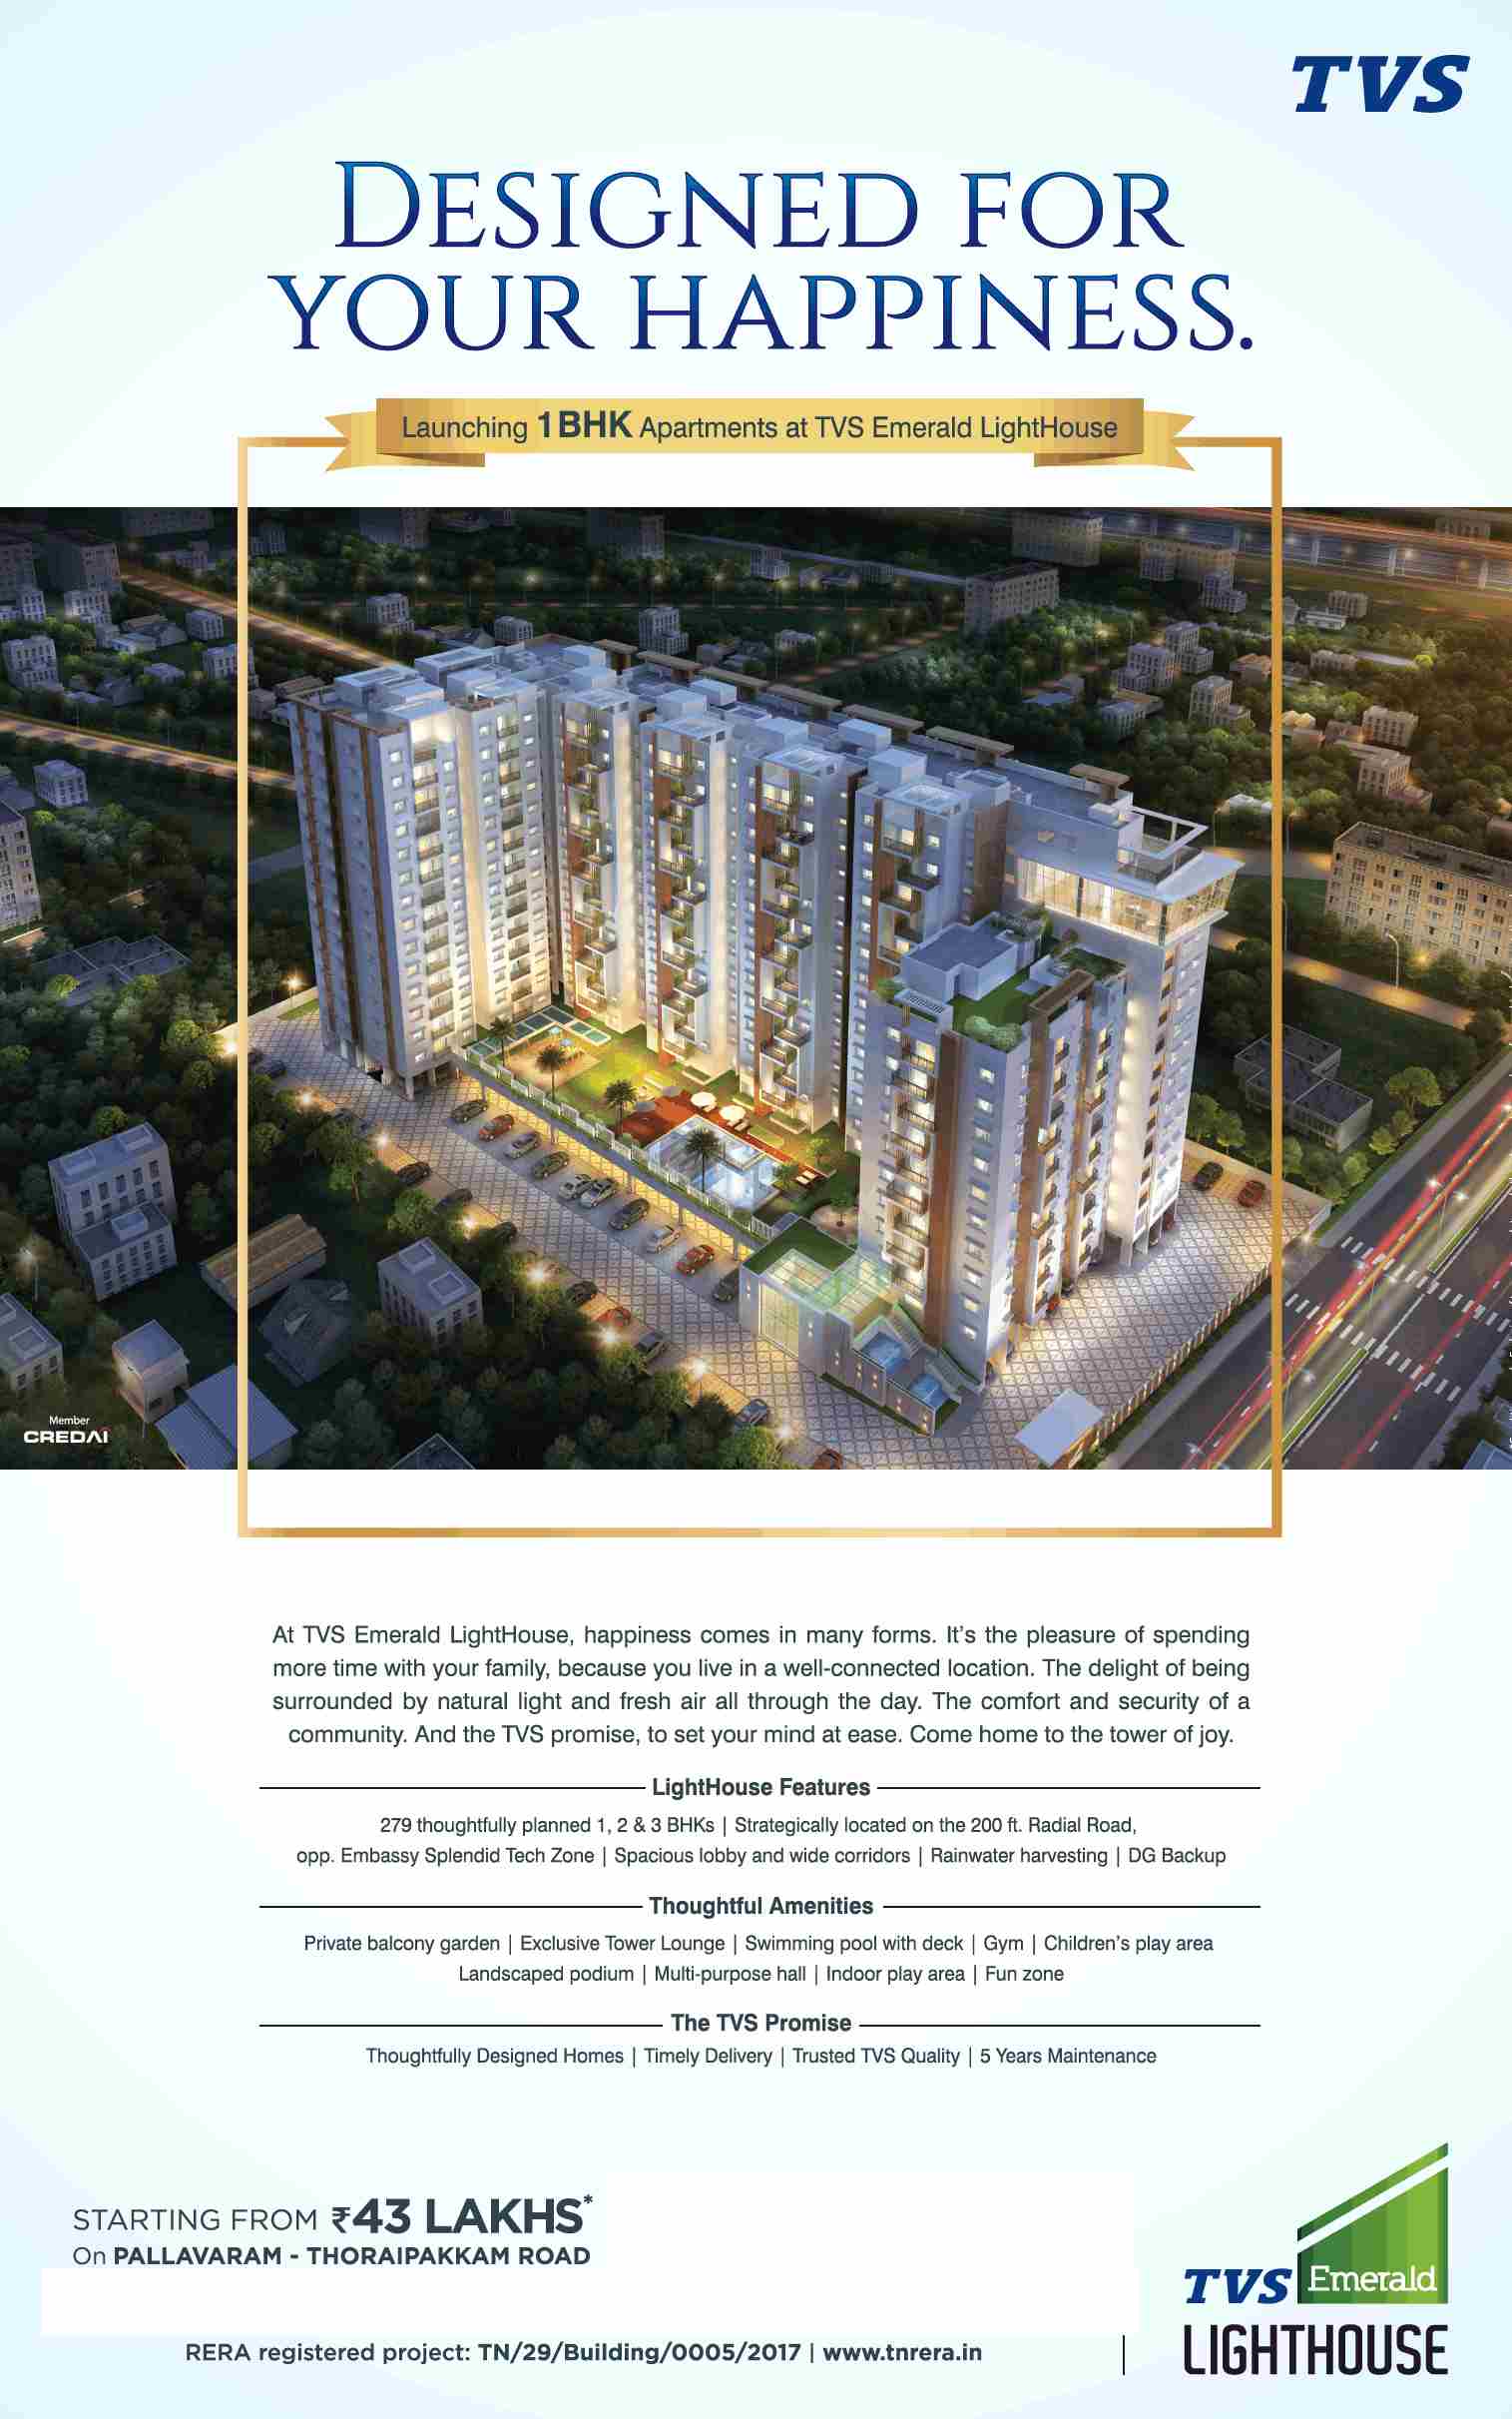 Book 1 BHK @ Rs 43 Lakhs at TVS Emerald LightHouse in Chennai